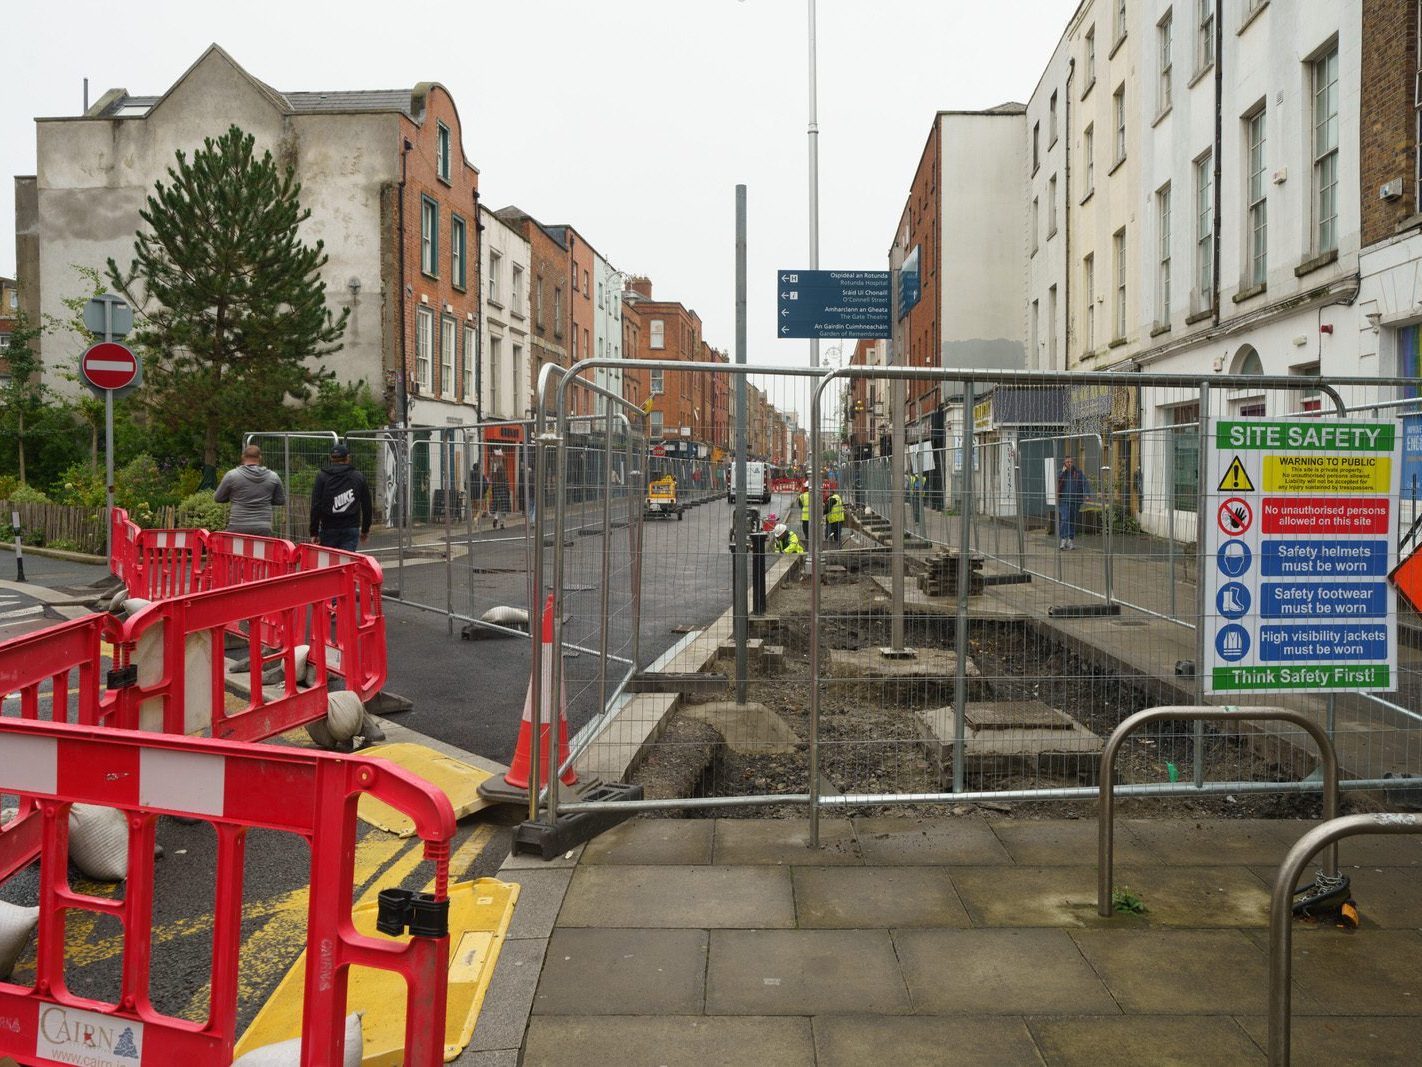 CAPEL STREET ON A DULL WET DAY [INTERIM CAPEL STREET IMPROVEMENT WORKS ARE NOW ONGOING] 002